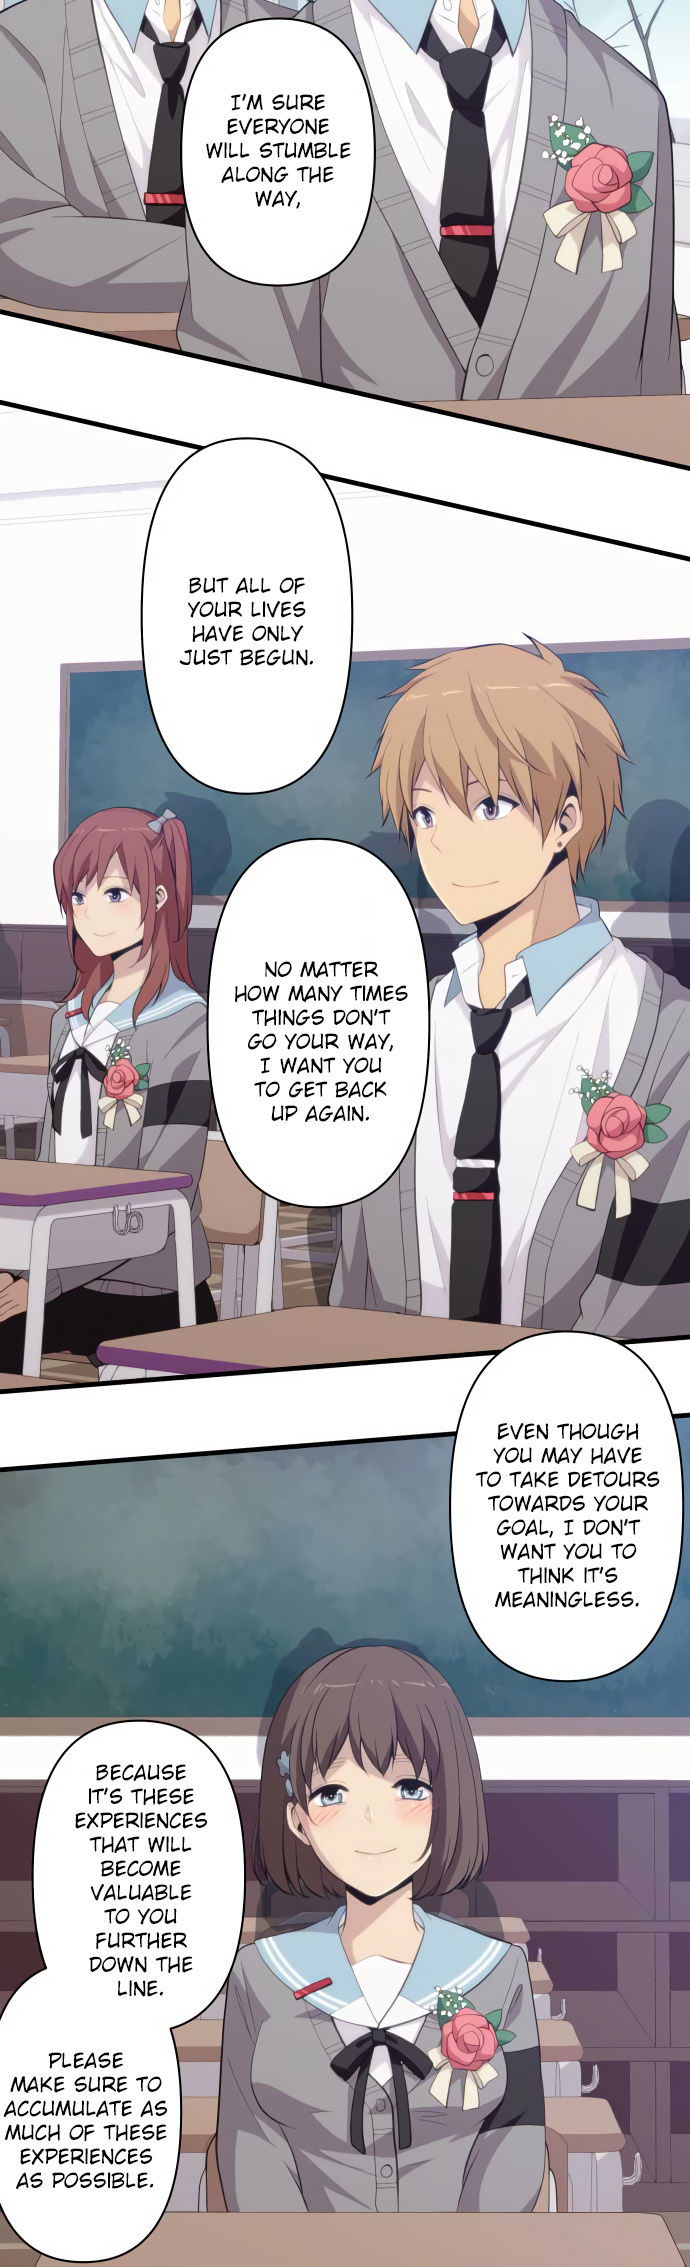 Relife 211 6